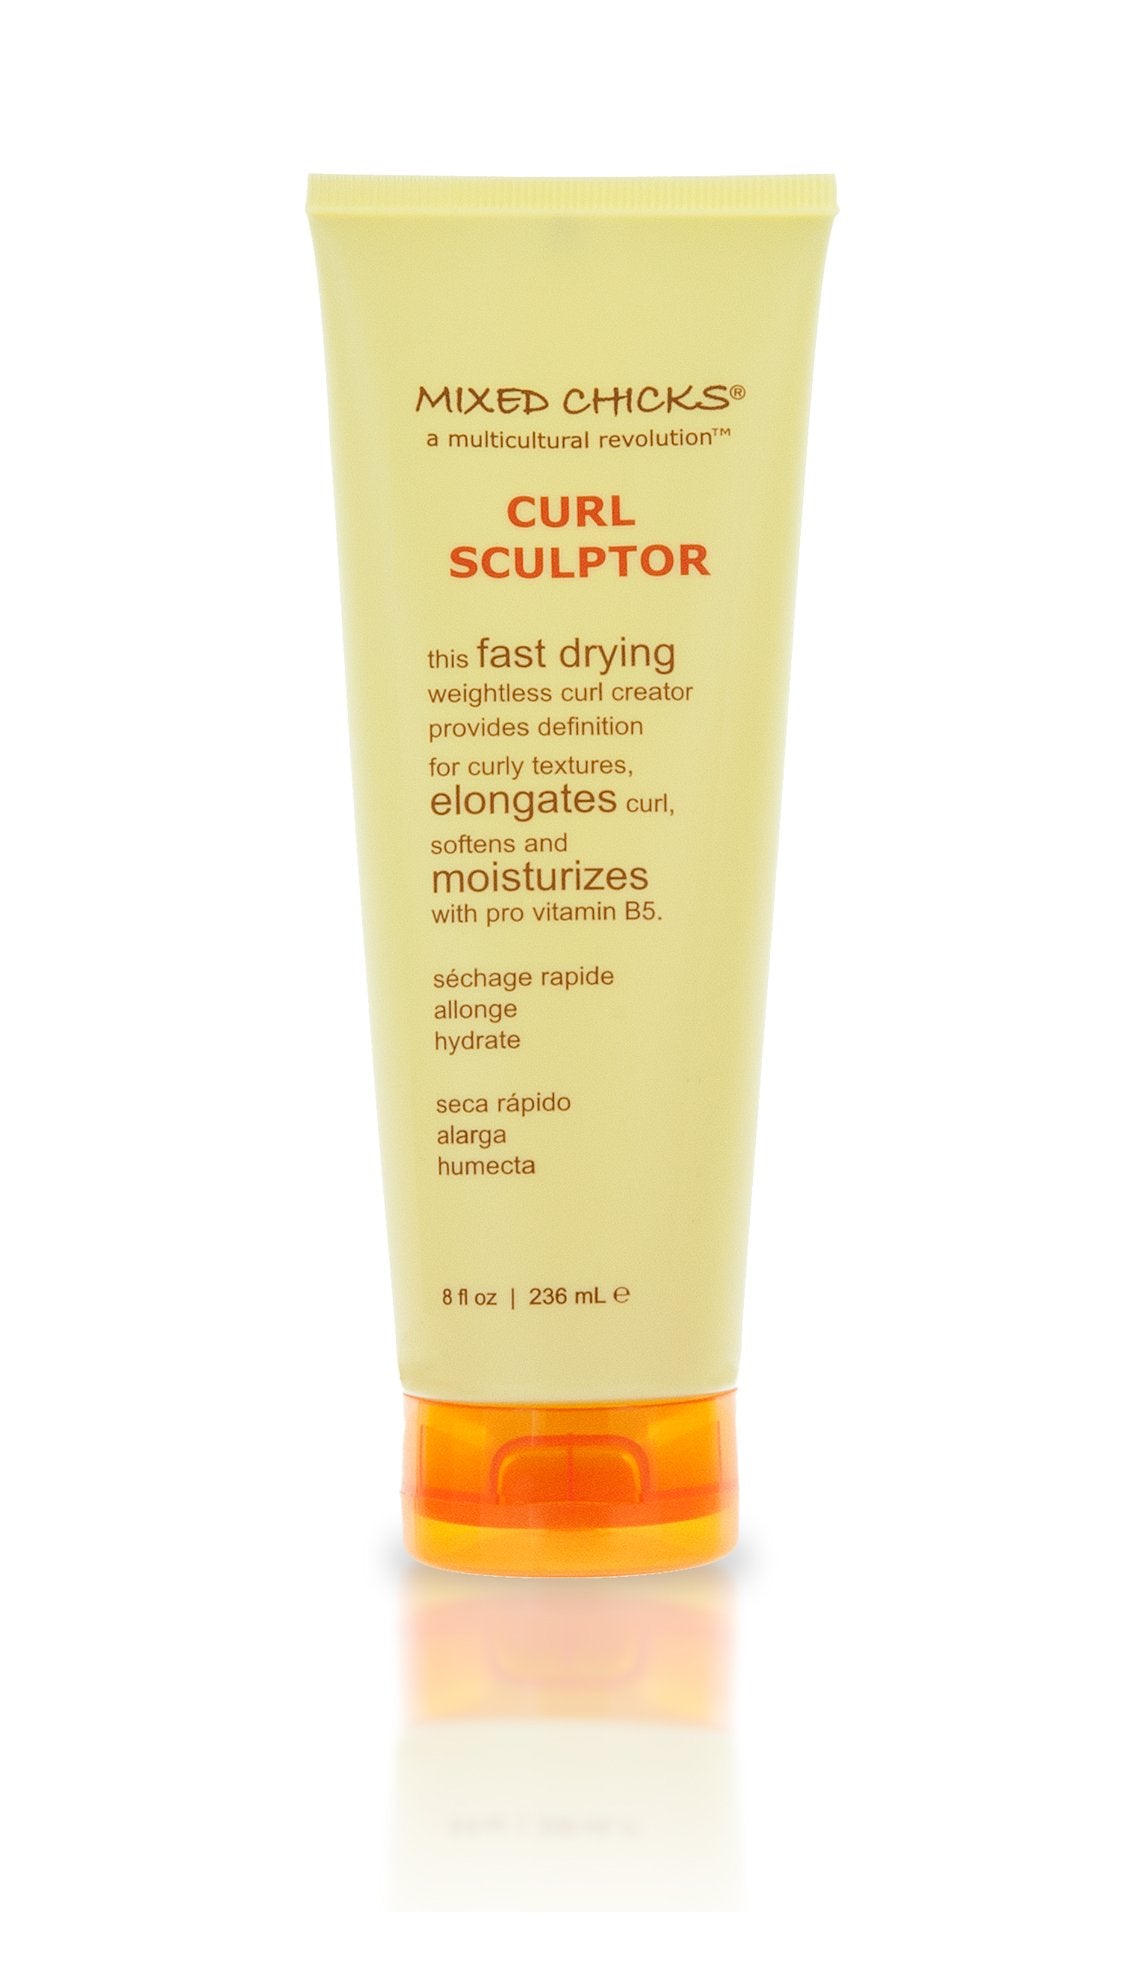 Mixed Chicks Curl Sculptor 8 ozHair Creme & LotionMIXED CHICKS